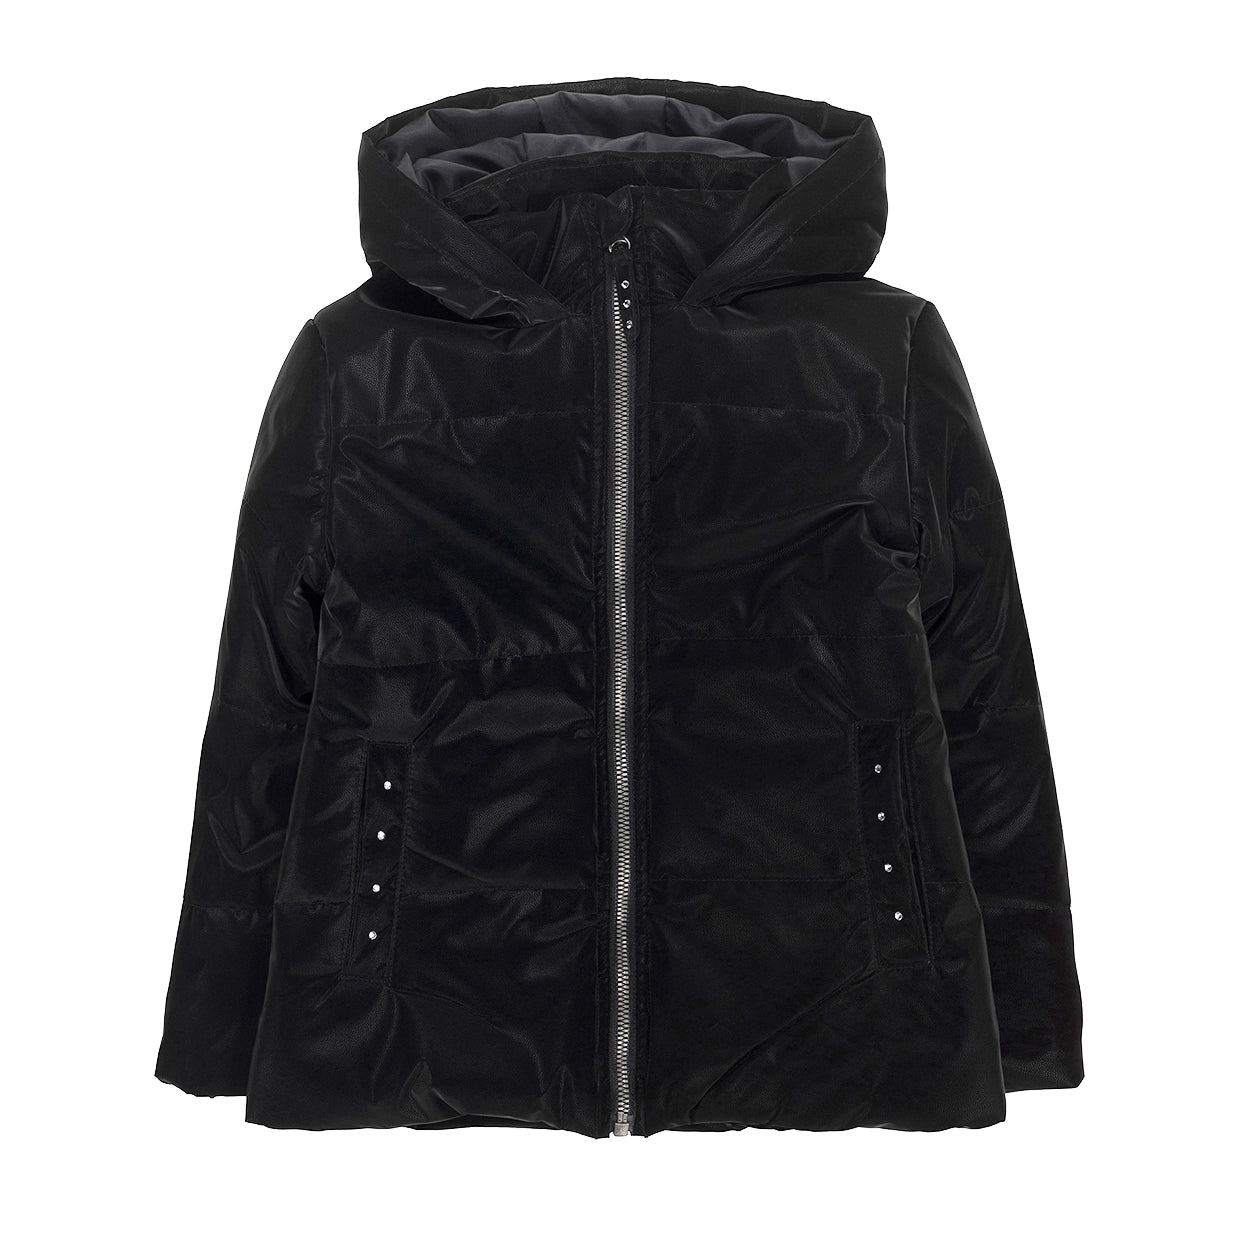 UBS2 Girls' down jacket in faux leather in black.